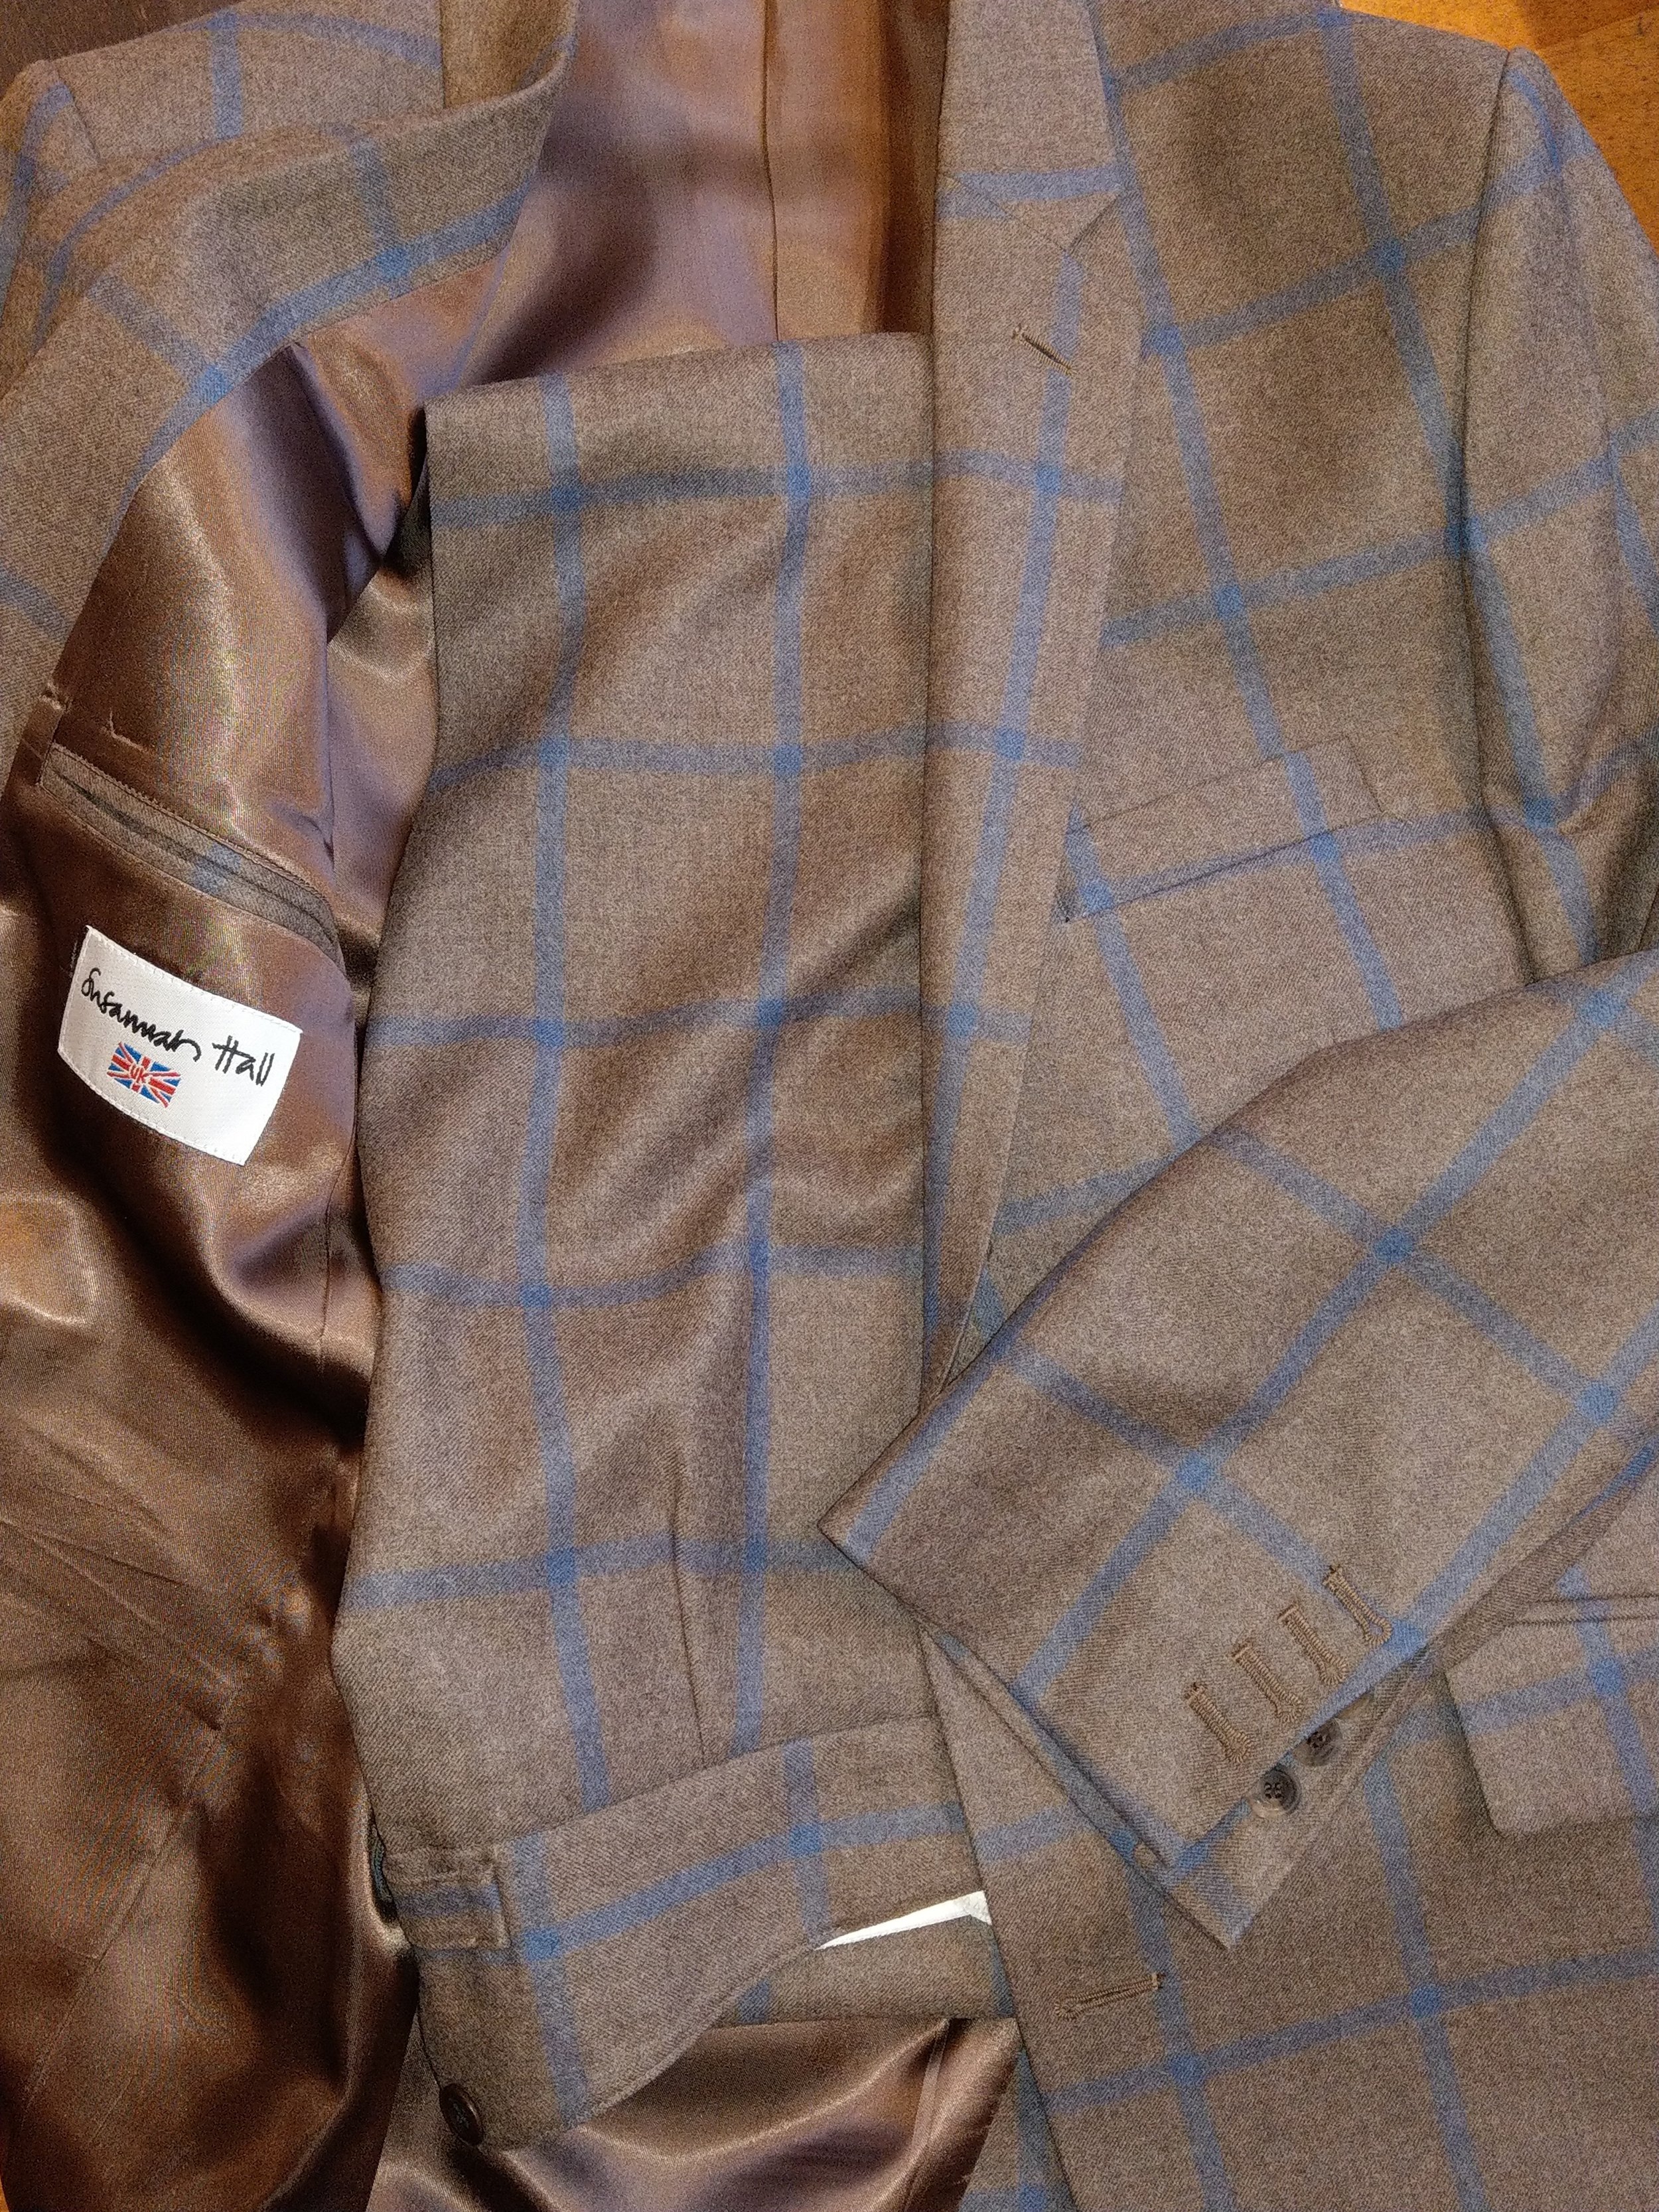 brown-check-flannel-suit-susannah-hall-gregg-wallace-bespoke-tailor-harrisons-uk-made-british.jpg